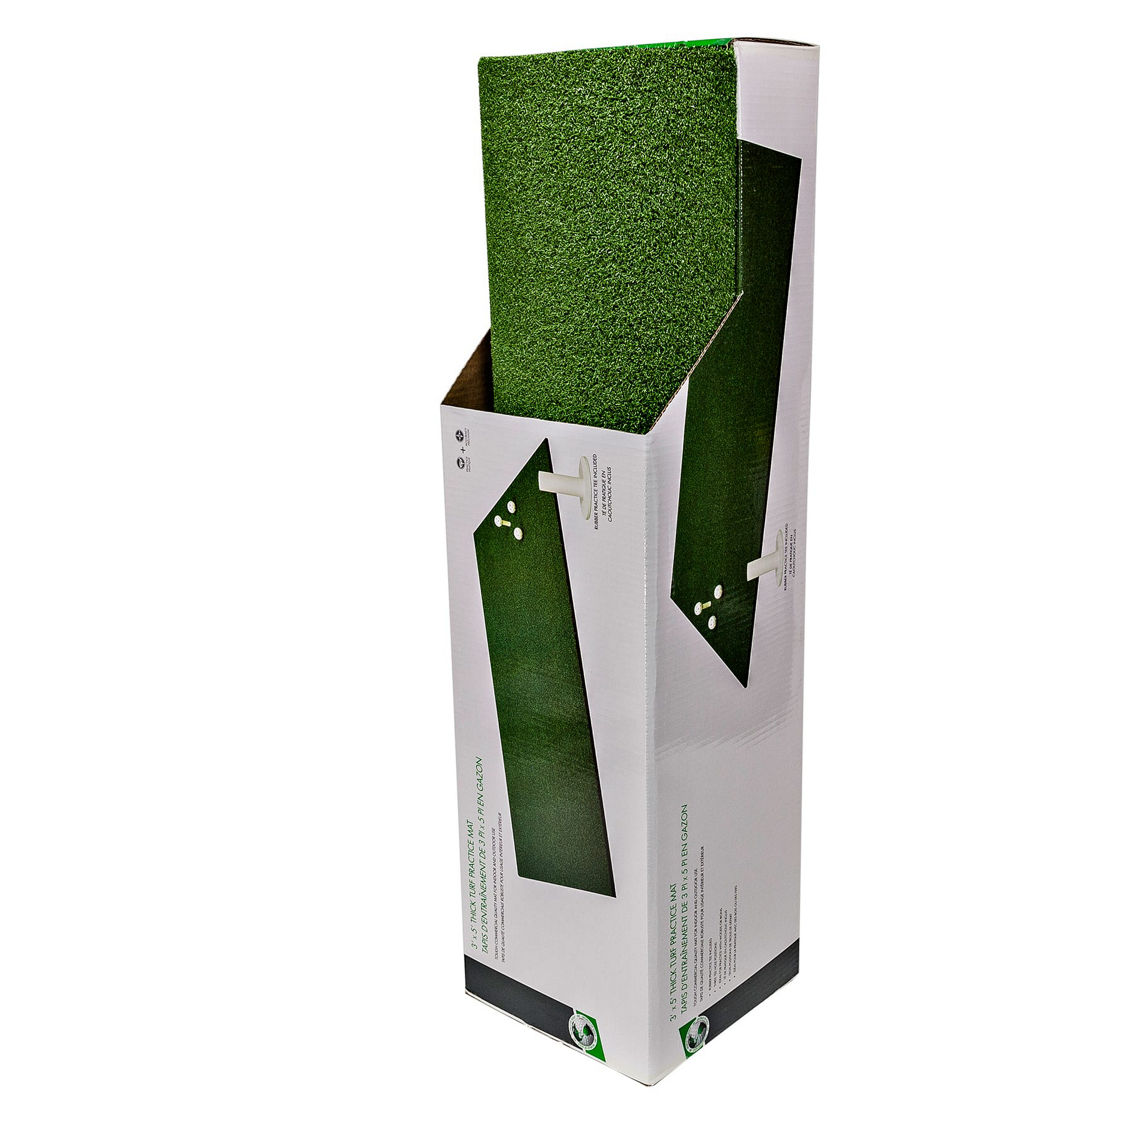 GOLF GIFTS & GALLERY 3X5 THICK TURF MAT - Image 2 of 4